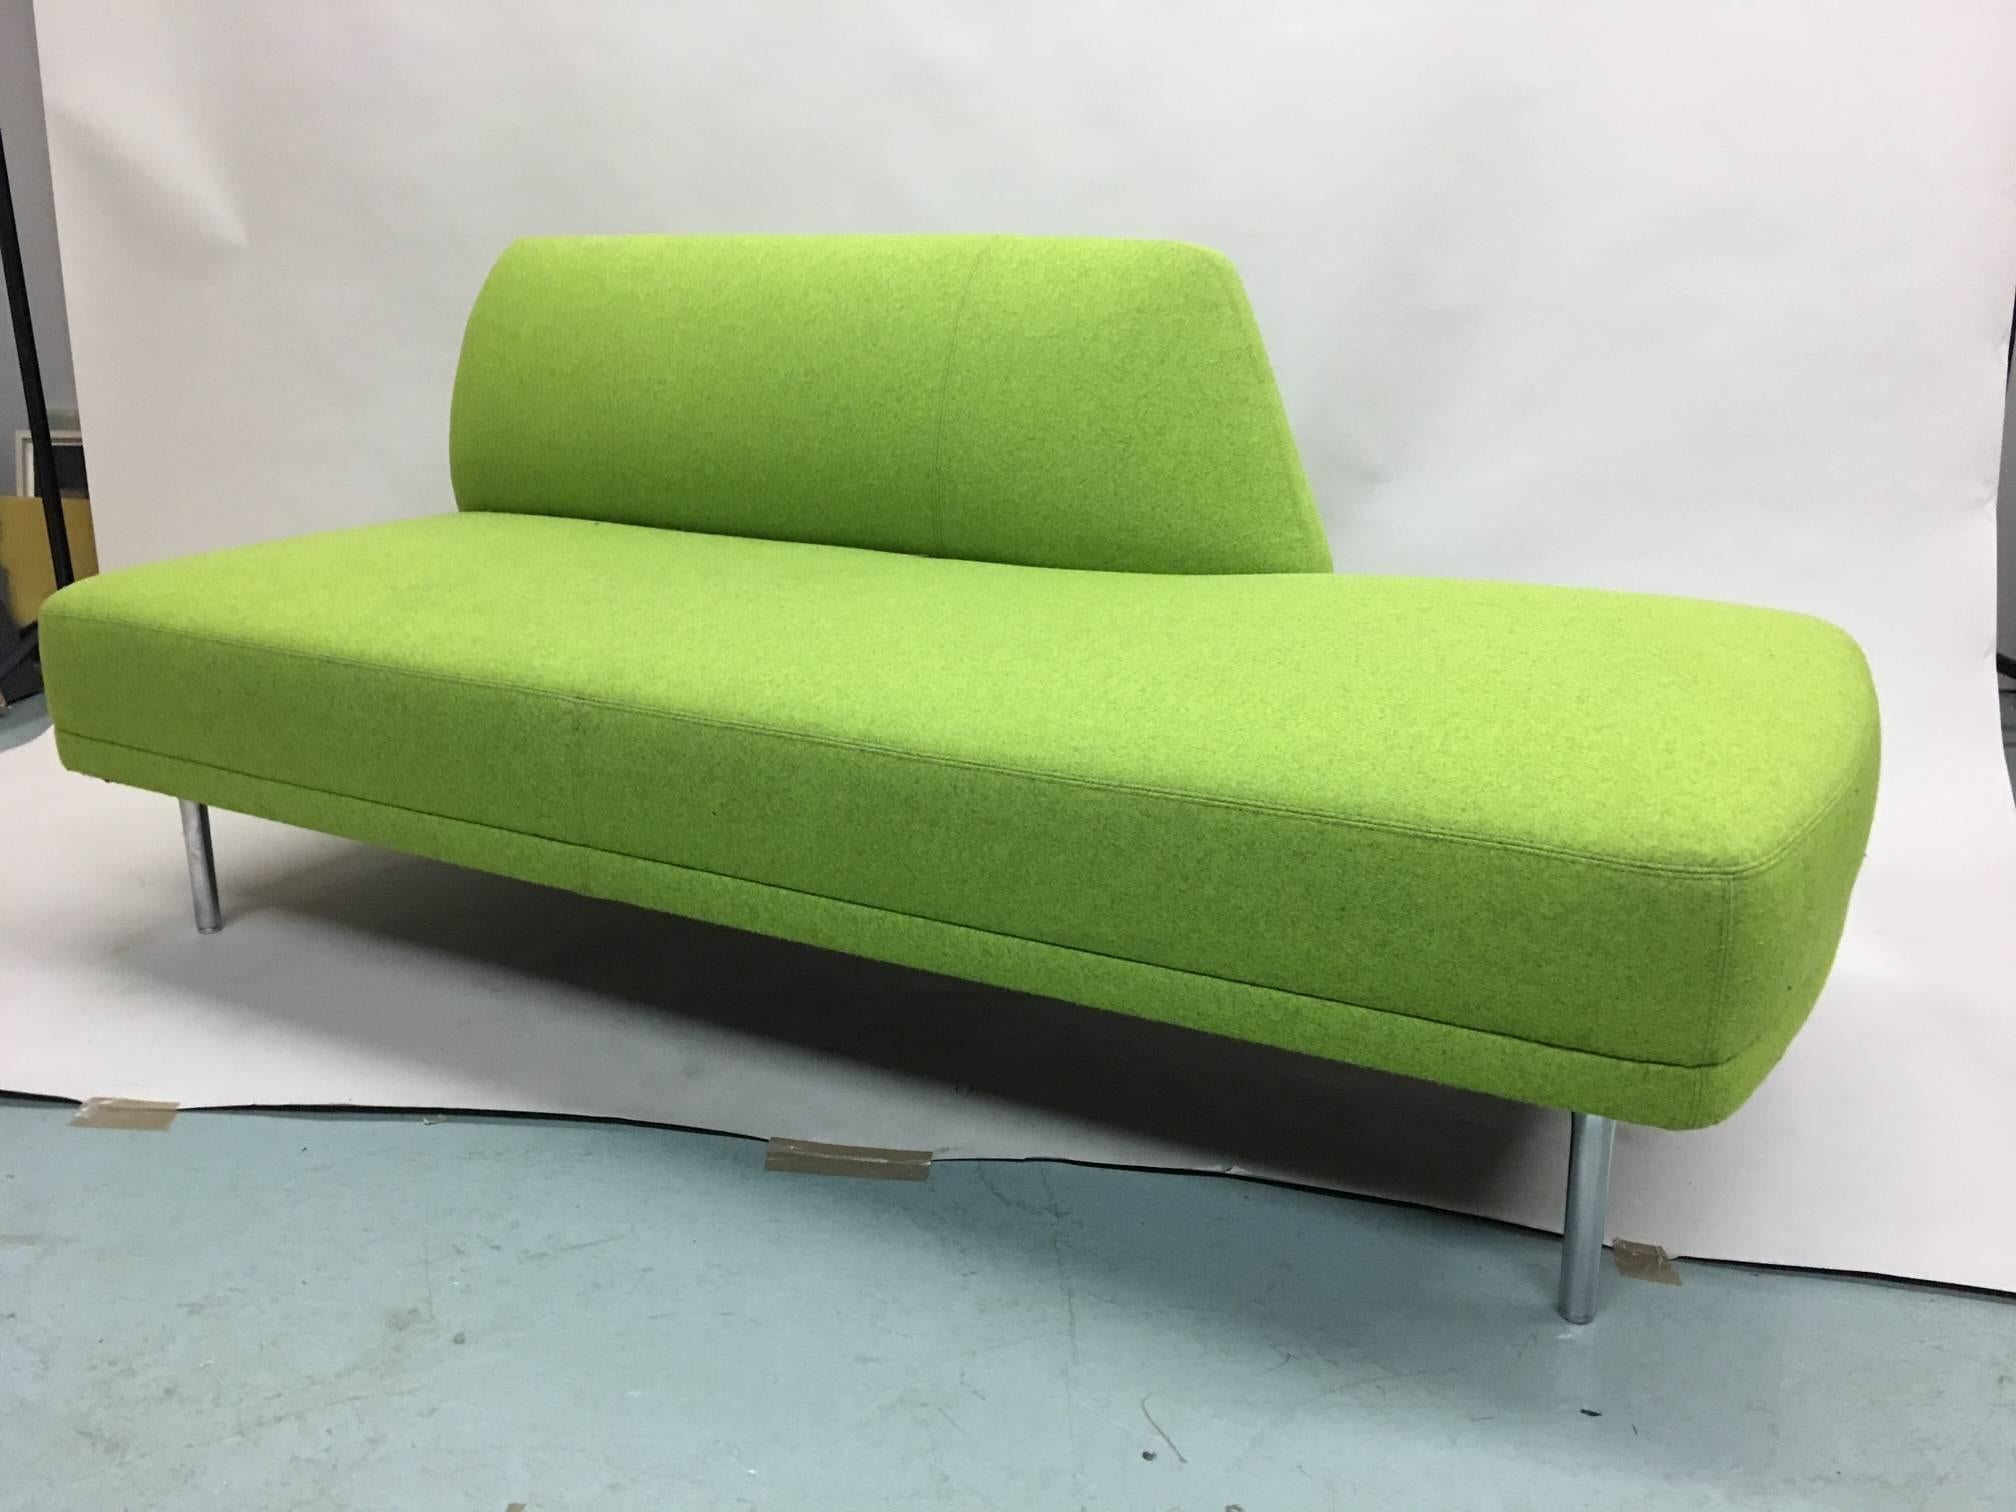 A chic Italian Midcentury Modern style design sofa / settee in a dynamic form and with sensuous felt upholstery in moss green. Its unusual  short width, low back and its sleek. low form give it exceptional aesthetic charm that allow it to work as a